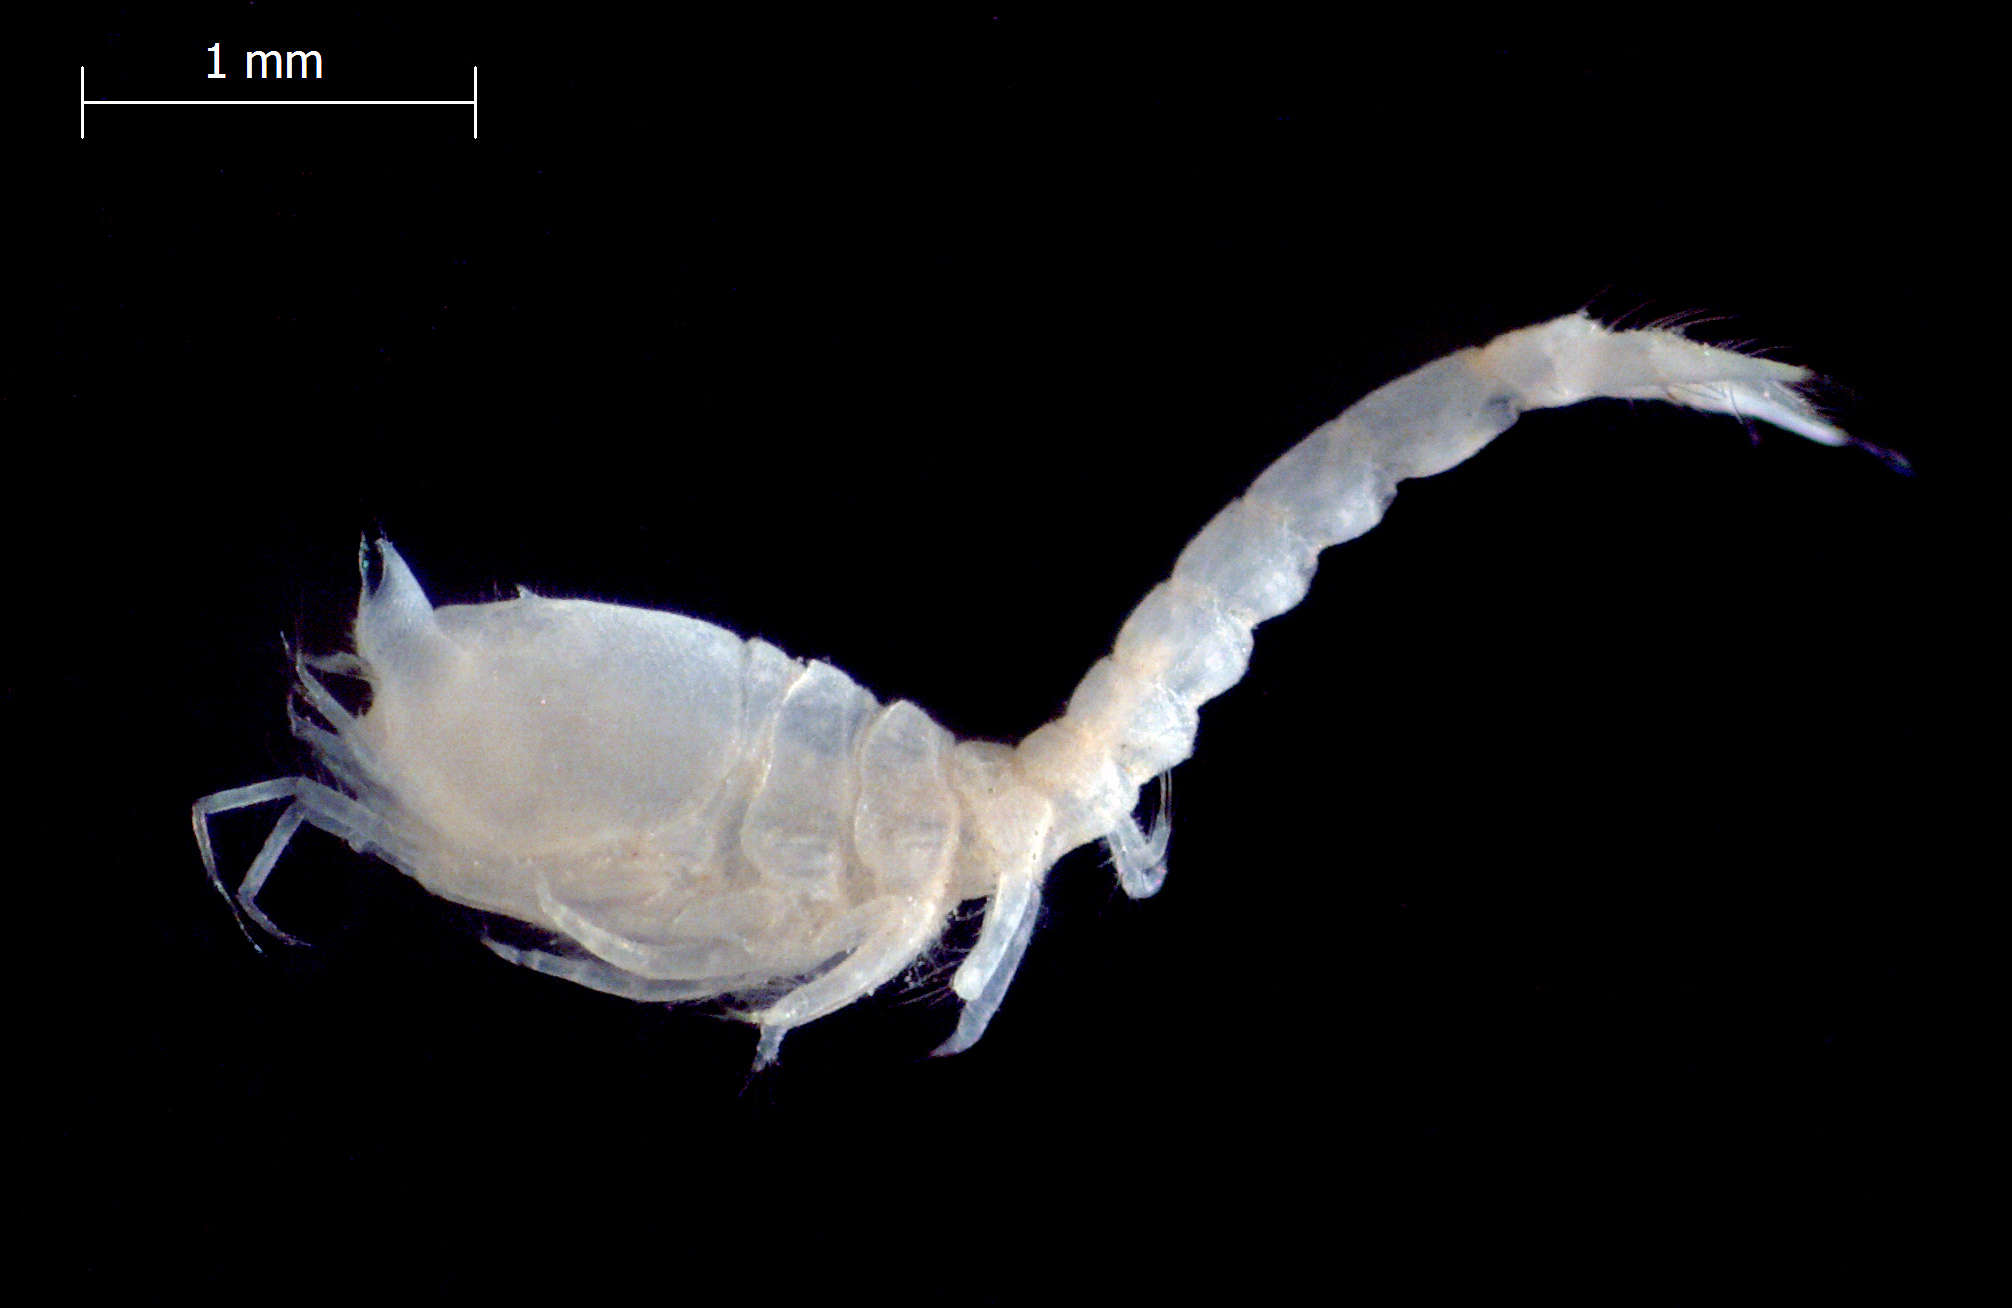 Image of typical crustaceans